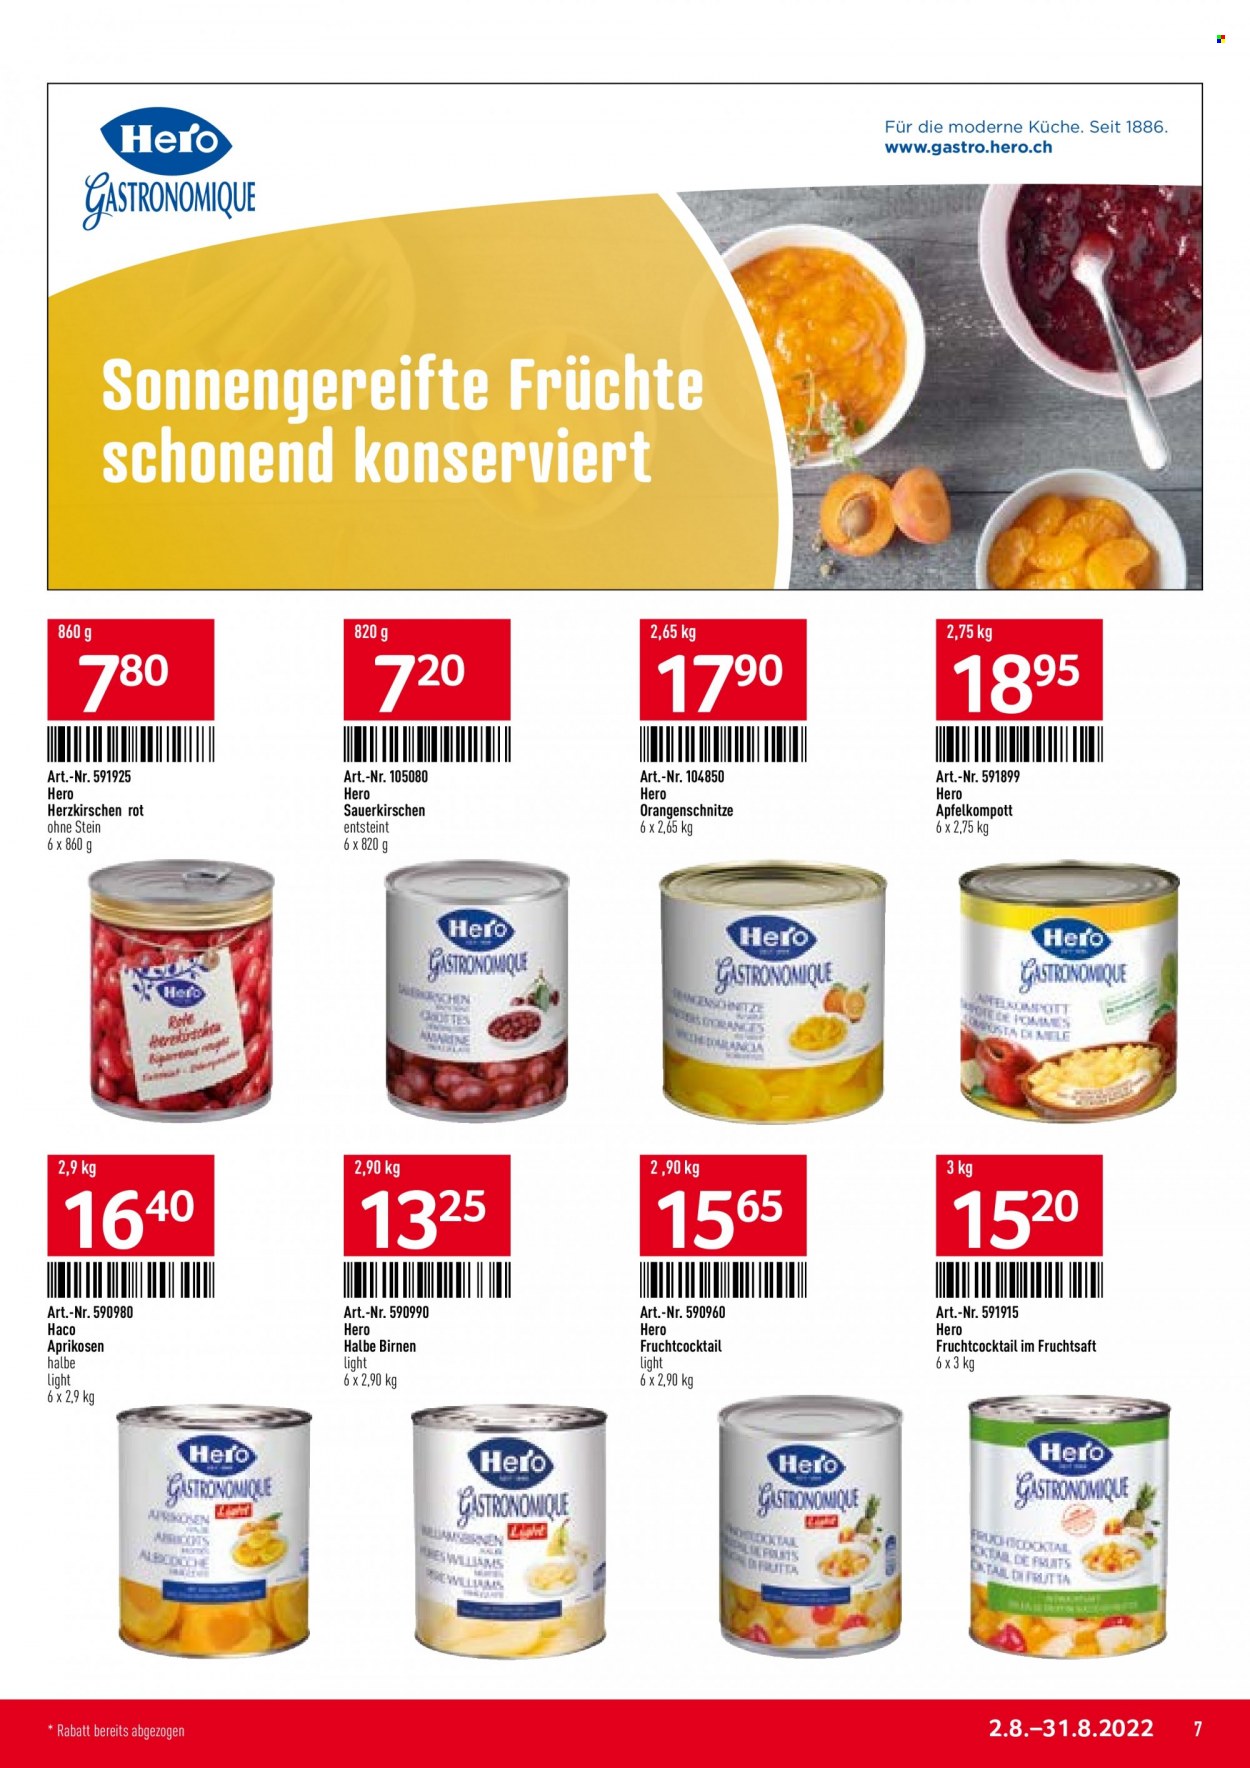 Catalogue TransGourmet - 2.8.2022 - 31.8.2022. Page 7.